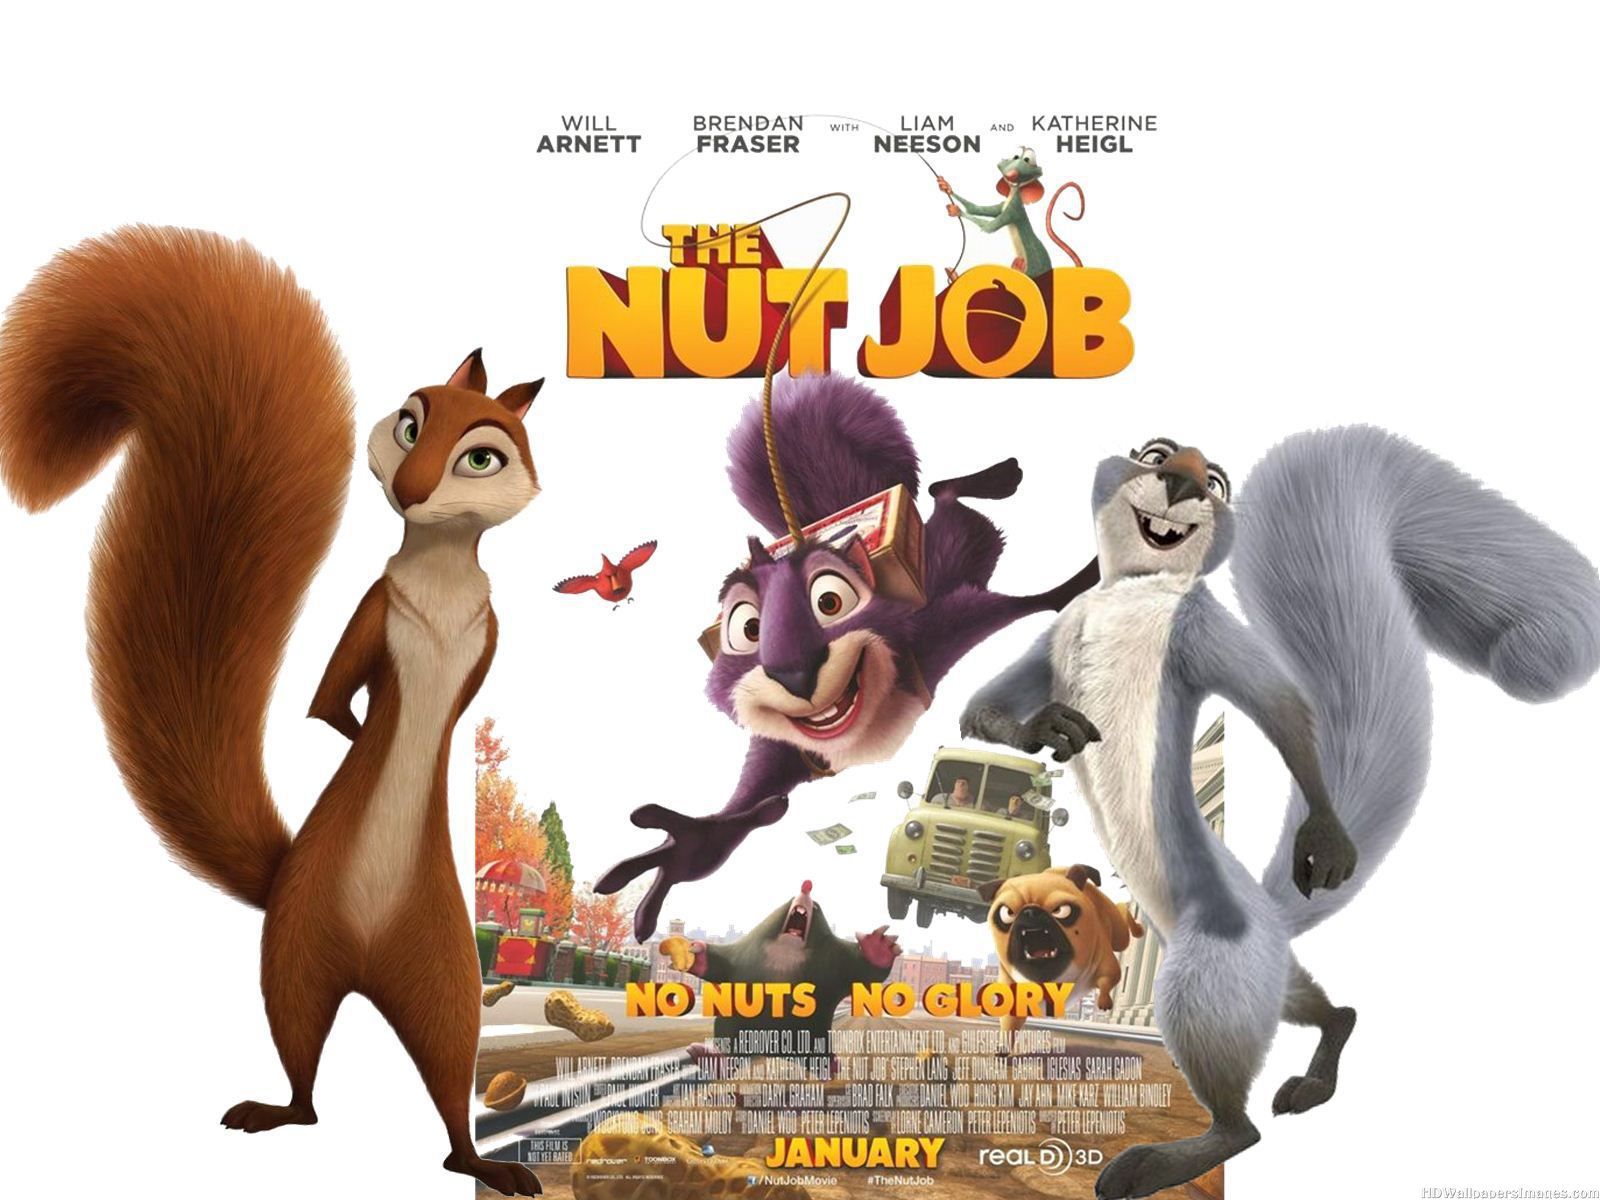 Amazing The Nut Job Pictures & Backgrounds